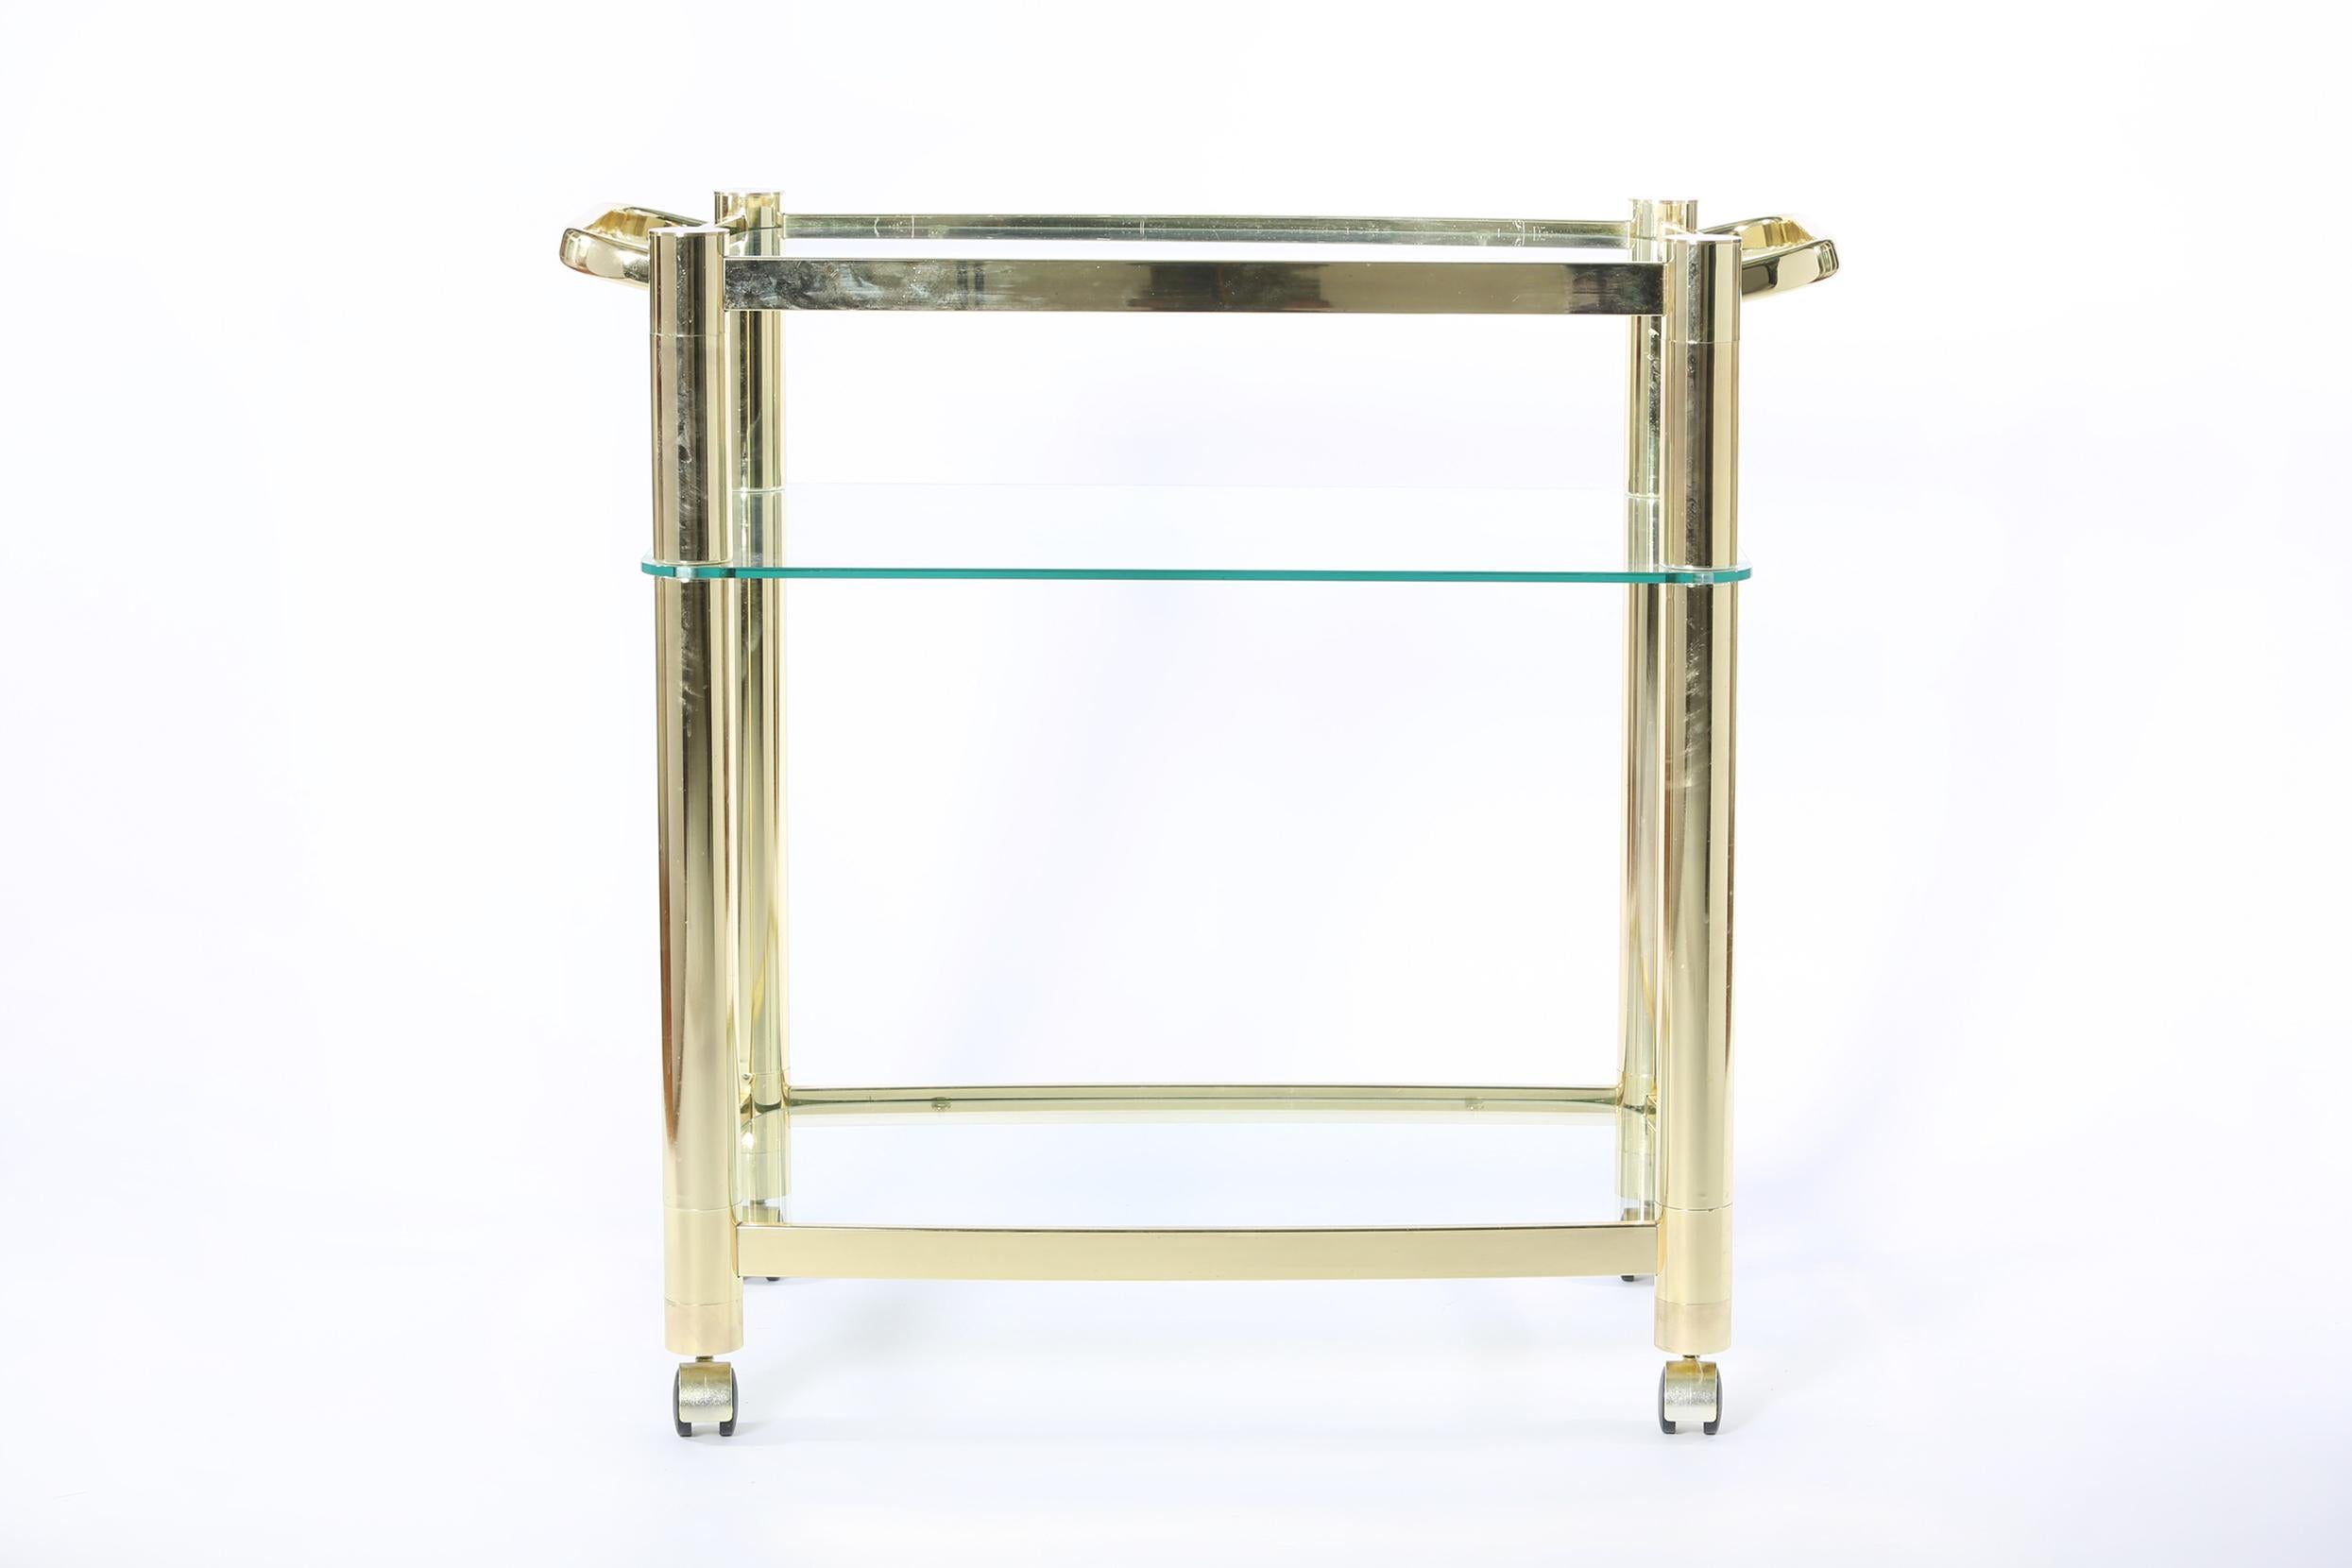 Mid-20th century three glass shelves wheeled bar cart / tea trolly with side handles. The bar cart is in great vintage condition. Minor wear consistent with age / use. The cart stand about 33 inches high x 37 inches length x 19 inches wide.